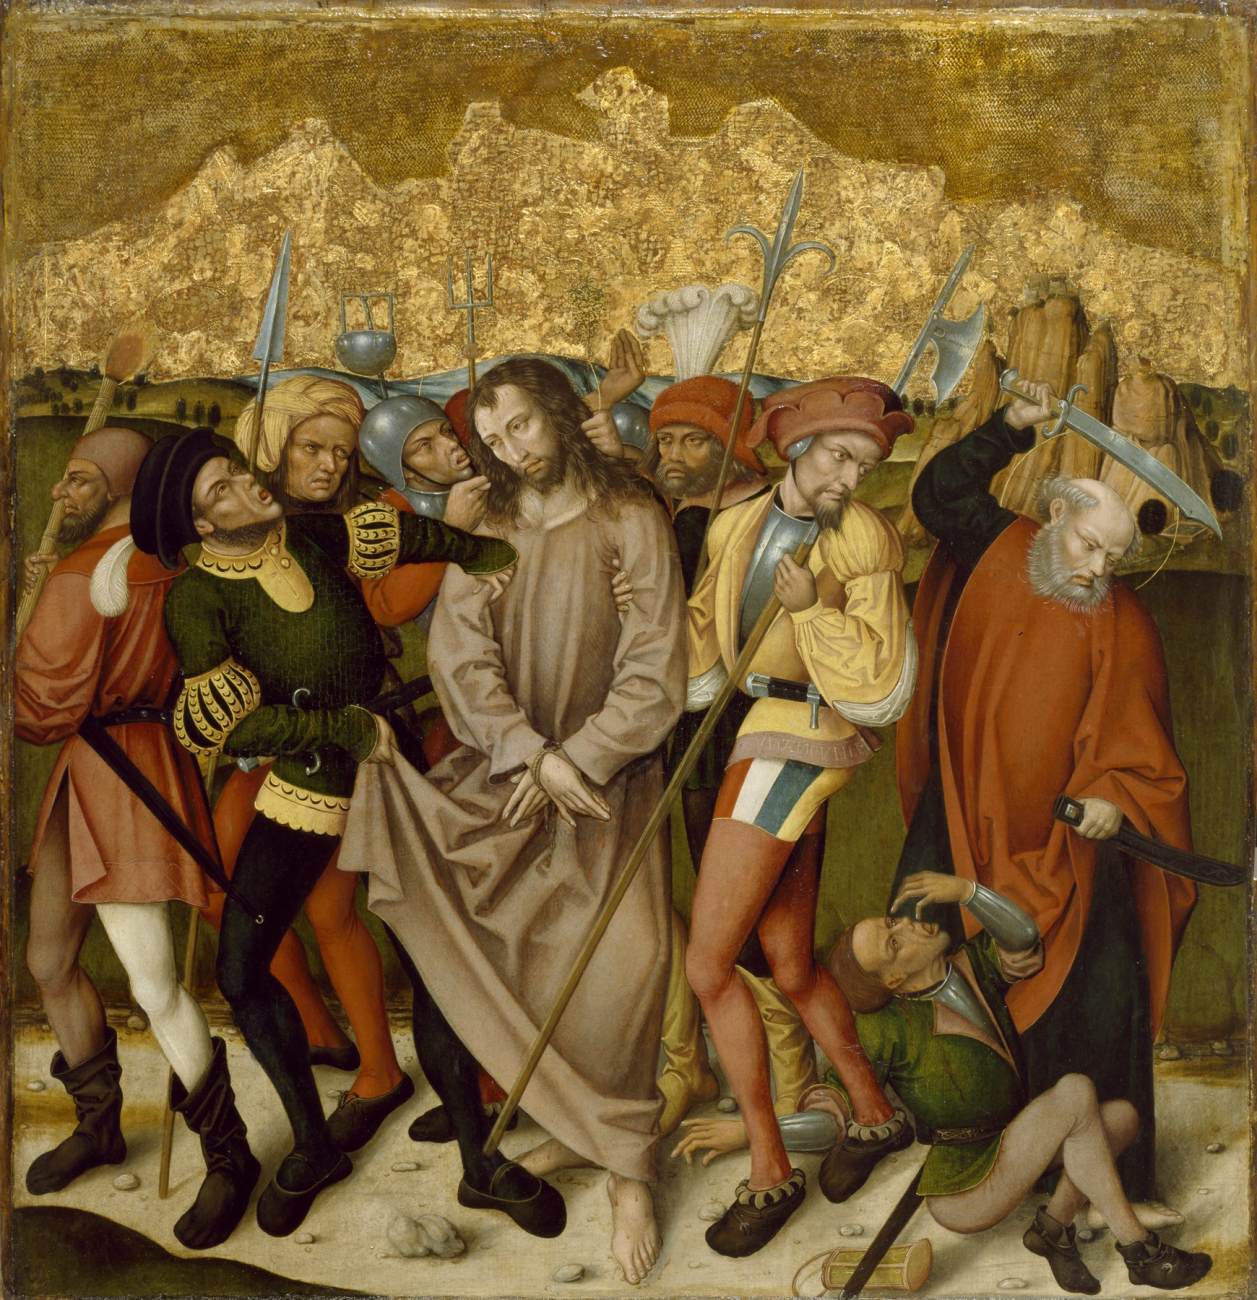 Altarpiece with The Passion of the Christ: Arrest of Christ